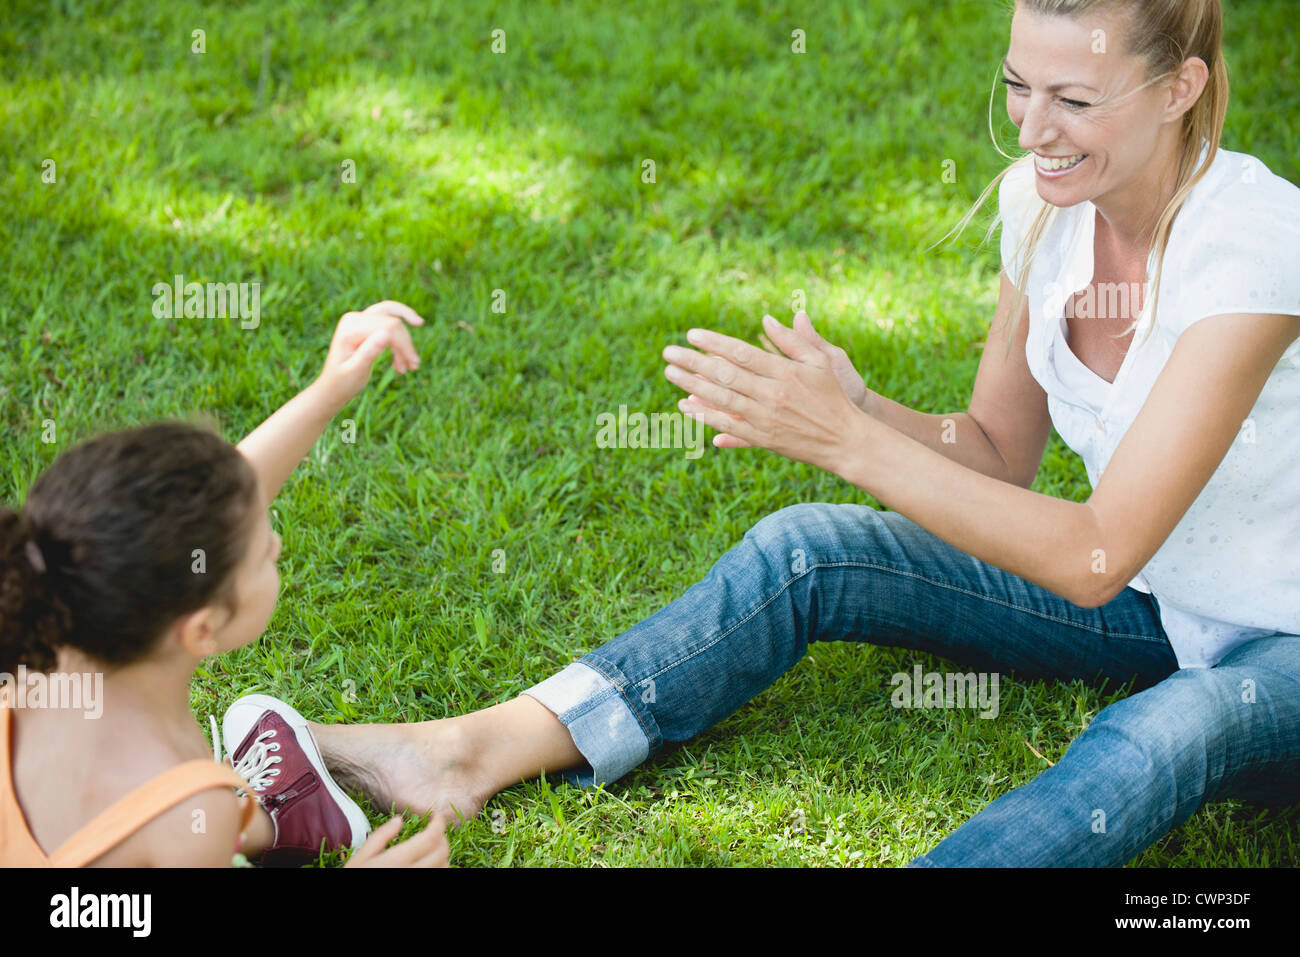 Mother and daughter playing on grass Stock Photo